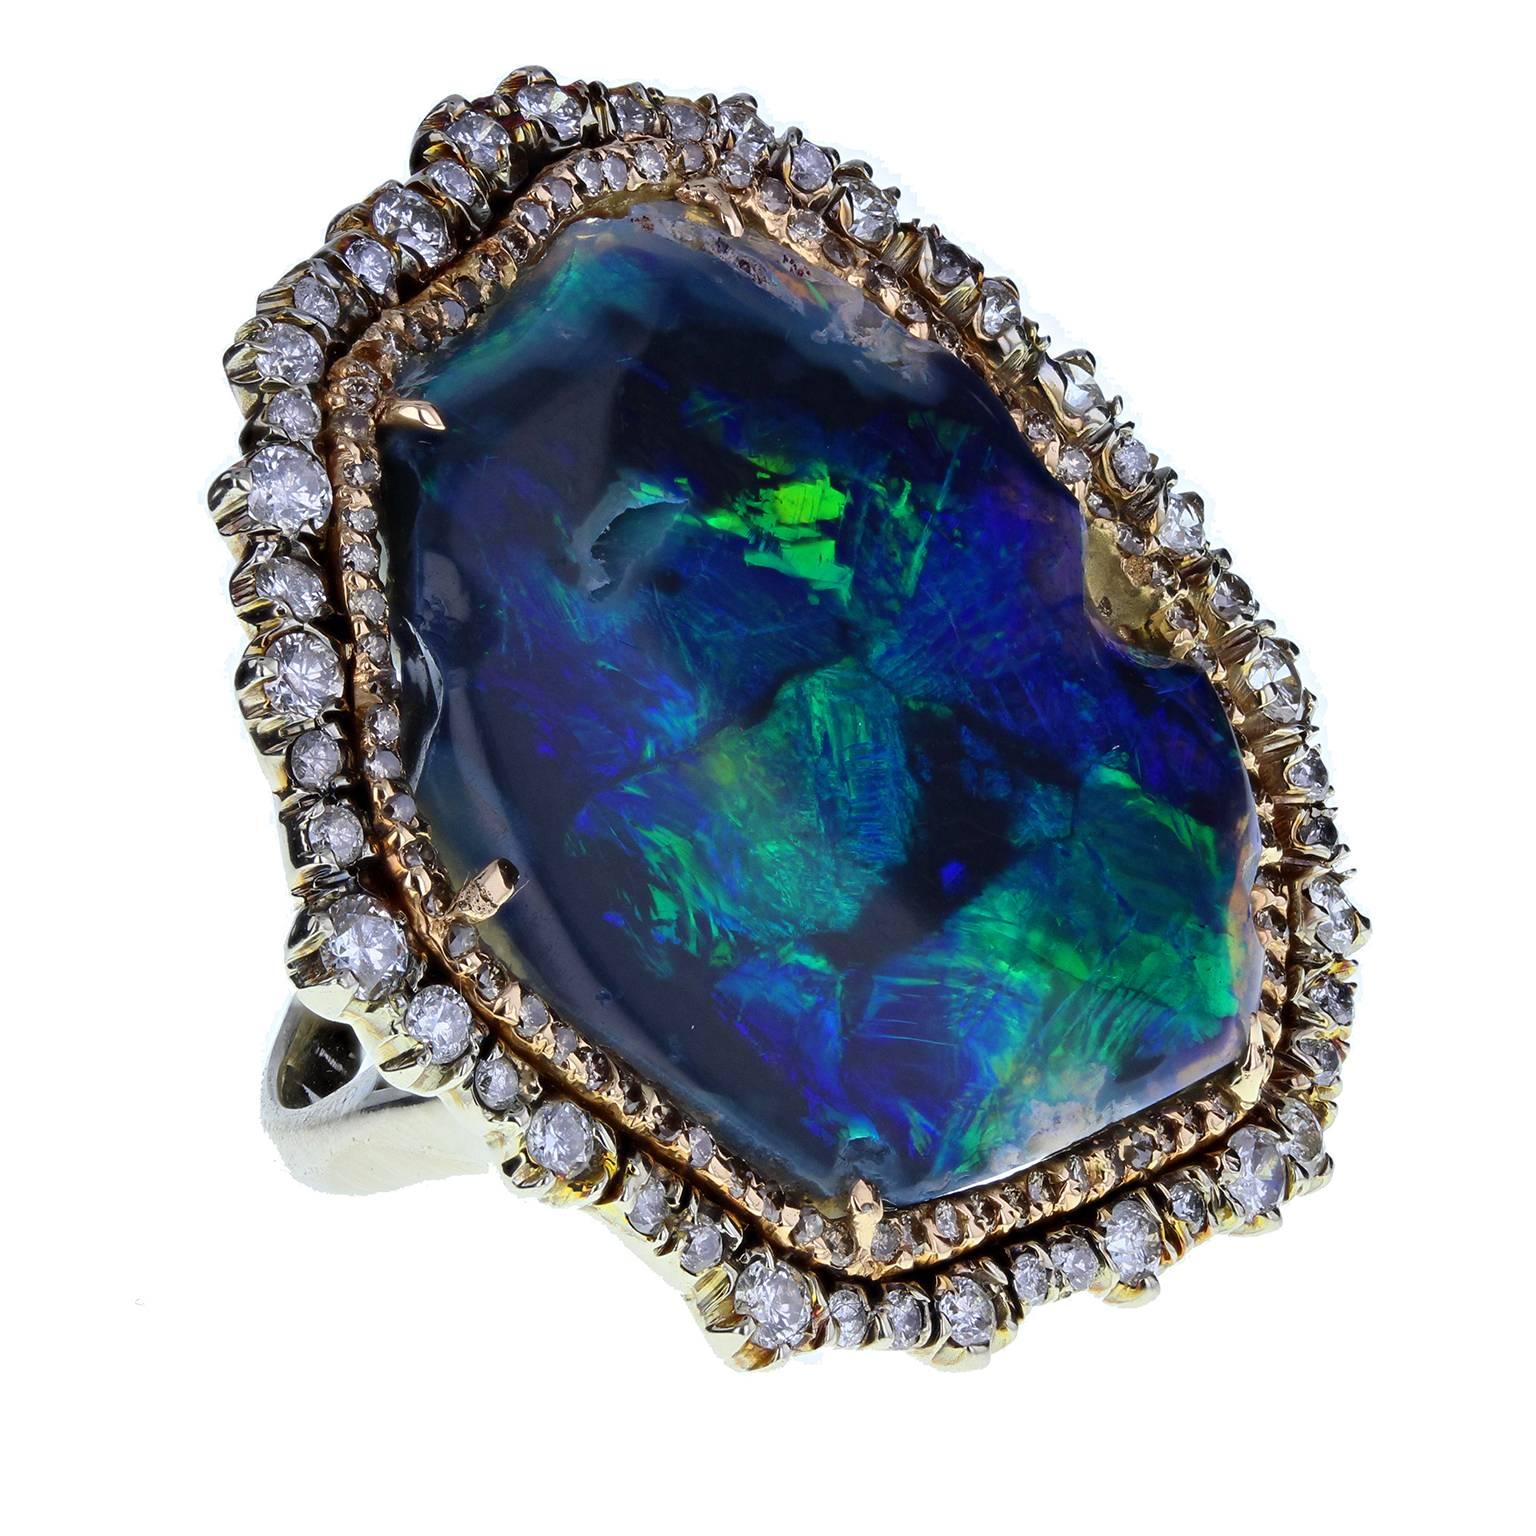 An abstract vintage ring featuring a exquisite black boulder opal that exhibits deep, iridescent peacock greens and blues. Surrounded by an organic double border of rose and white gold, pave set with various sized brilliant-cut diamonds. Plain white